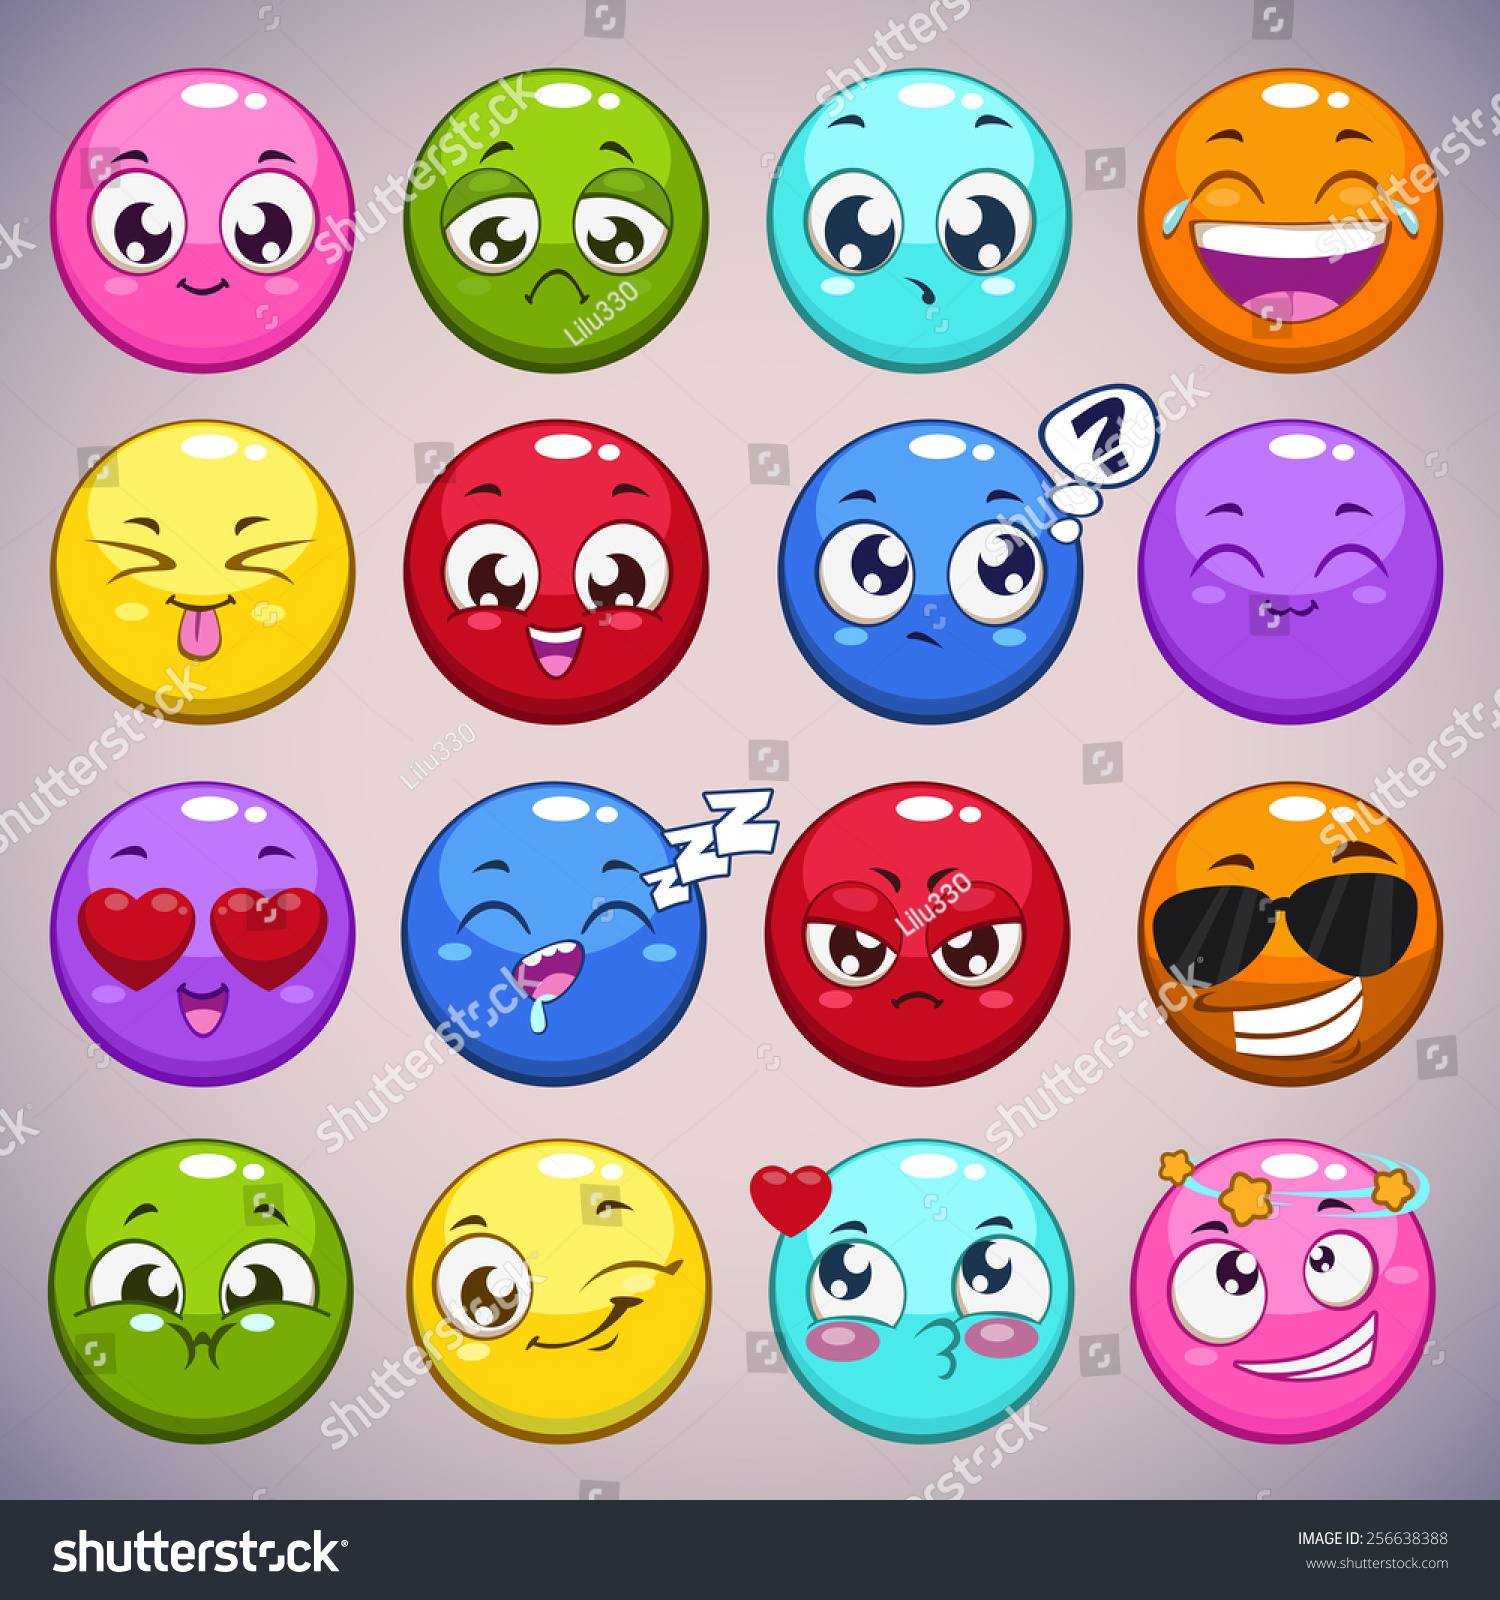 clipart of different emotions - photo #36